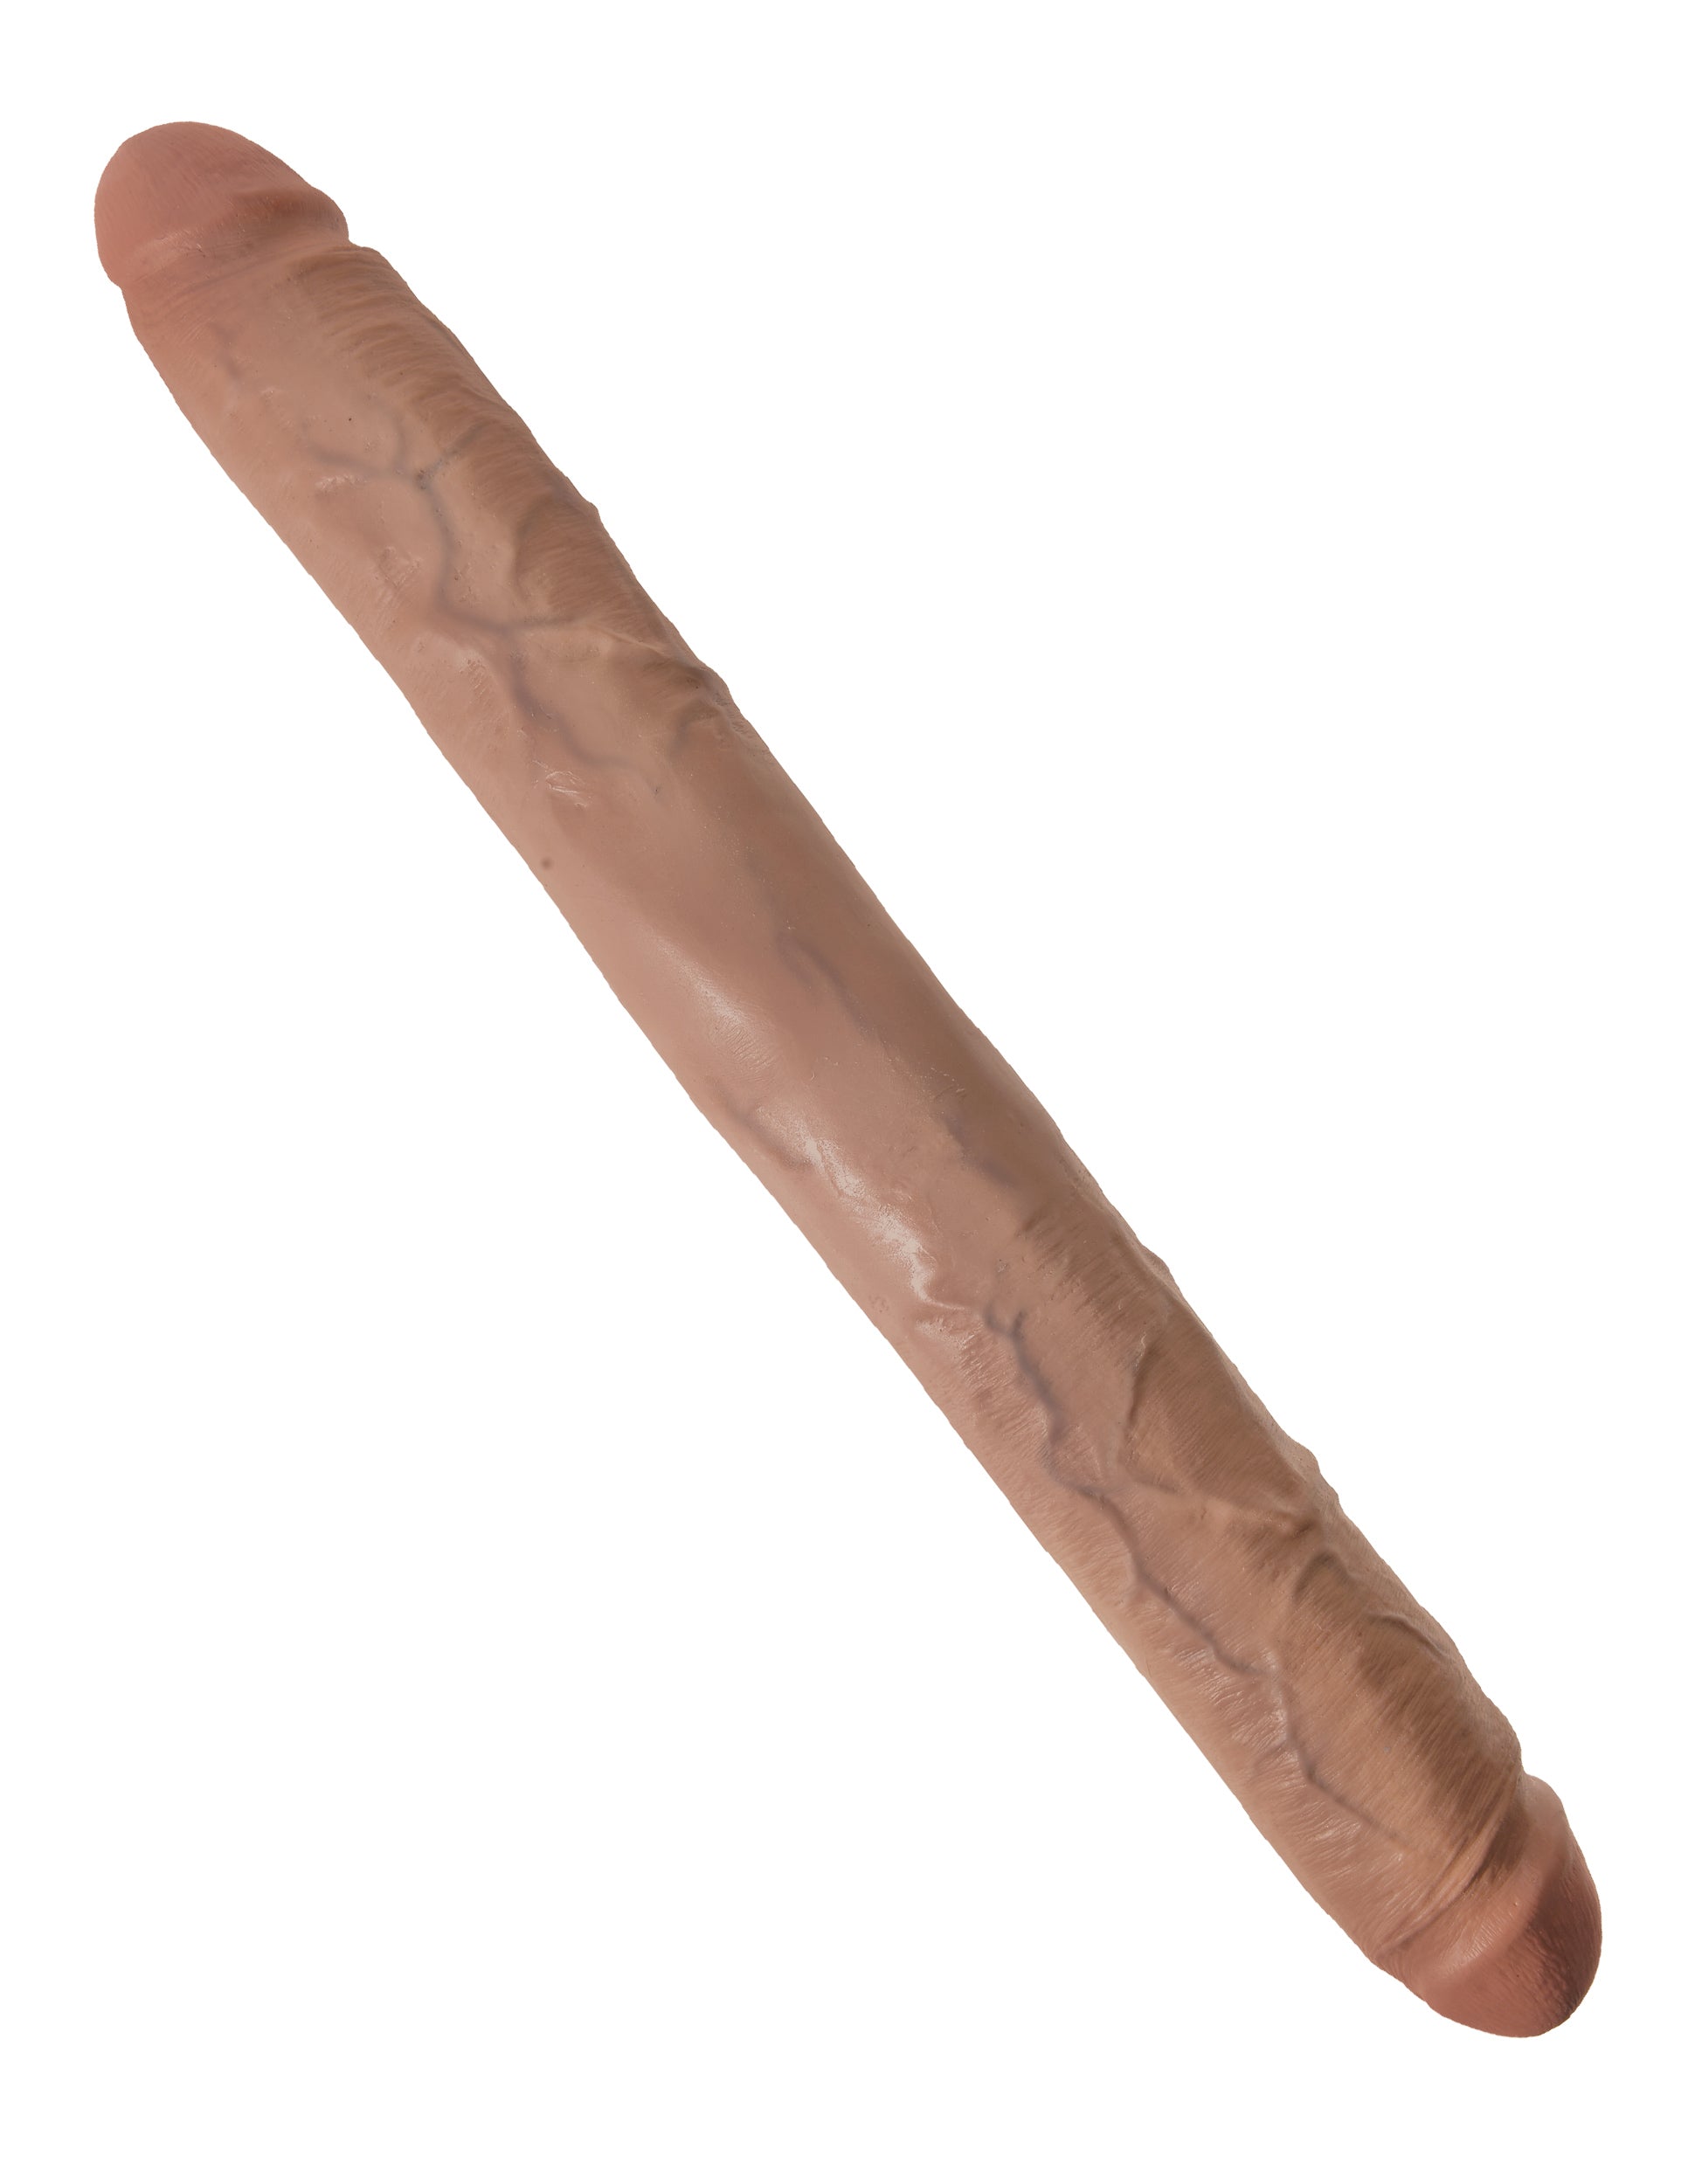 King Cock  16 Inch Thick Double Dildo - Tan PD5518-22